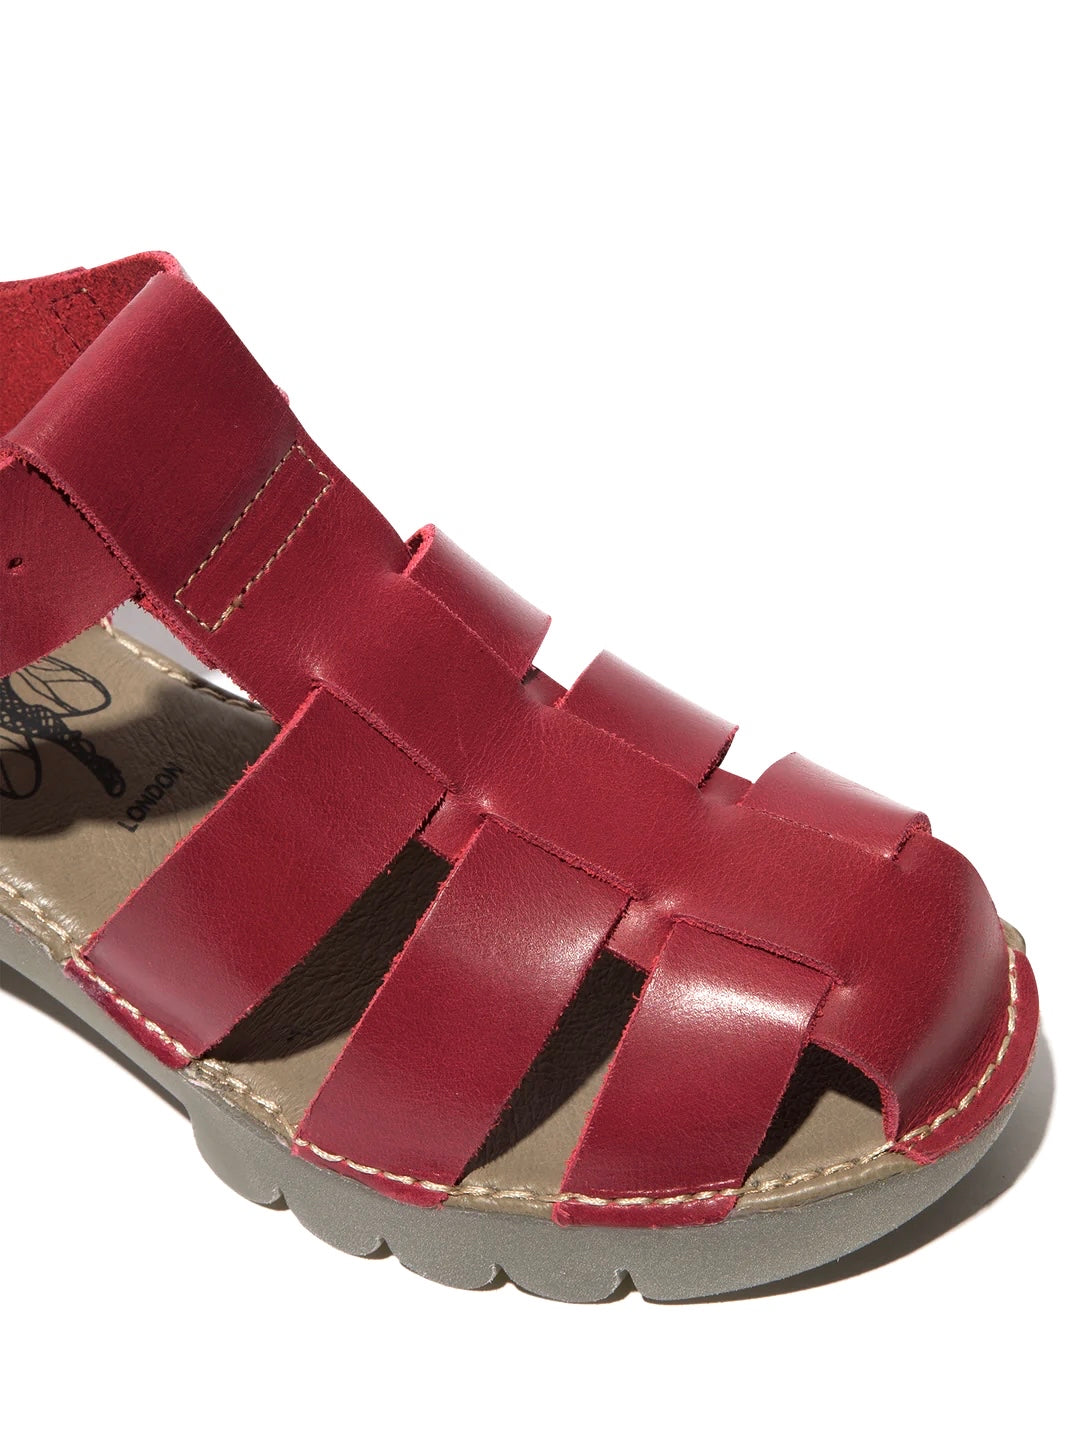 Fly London Emme511Fly Red Bridle Sandal Made In Portugal